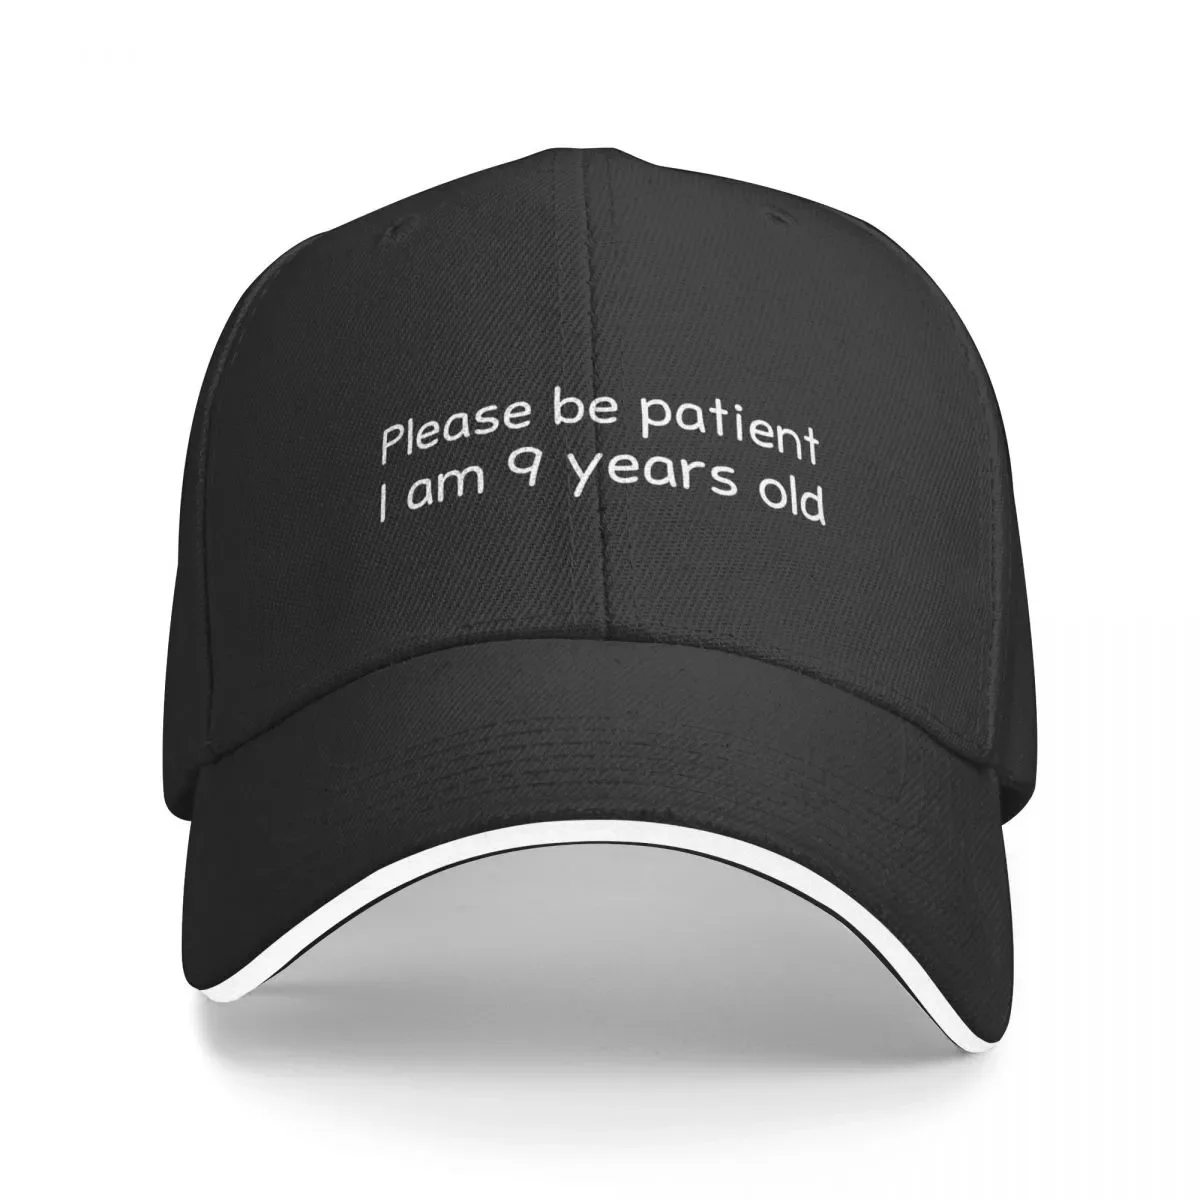 

New Please be patient I am 9 Years old Cap Baseball Cap Fashion beach beach hat hat for men Women's